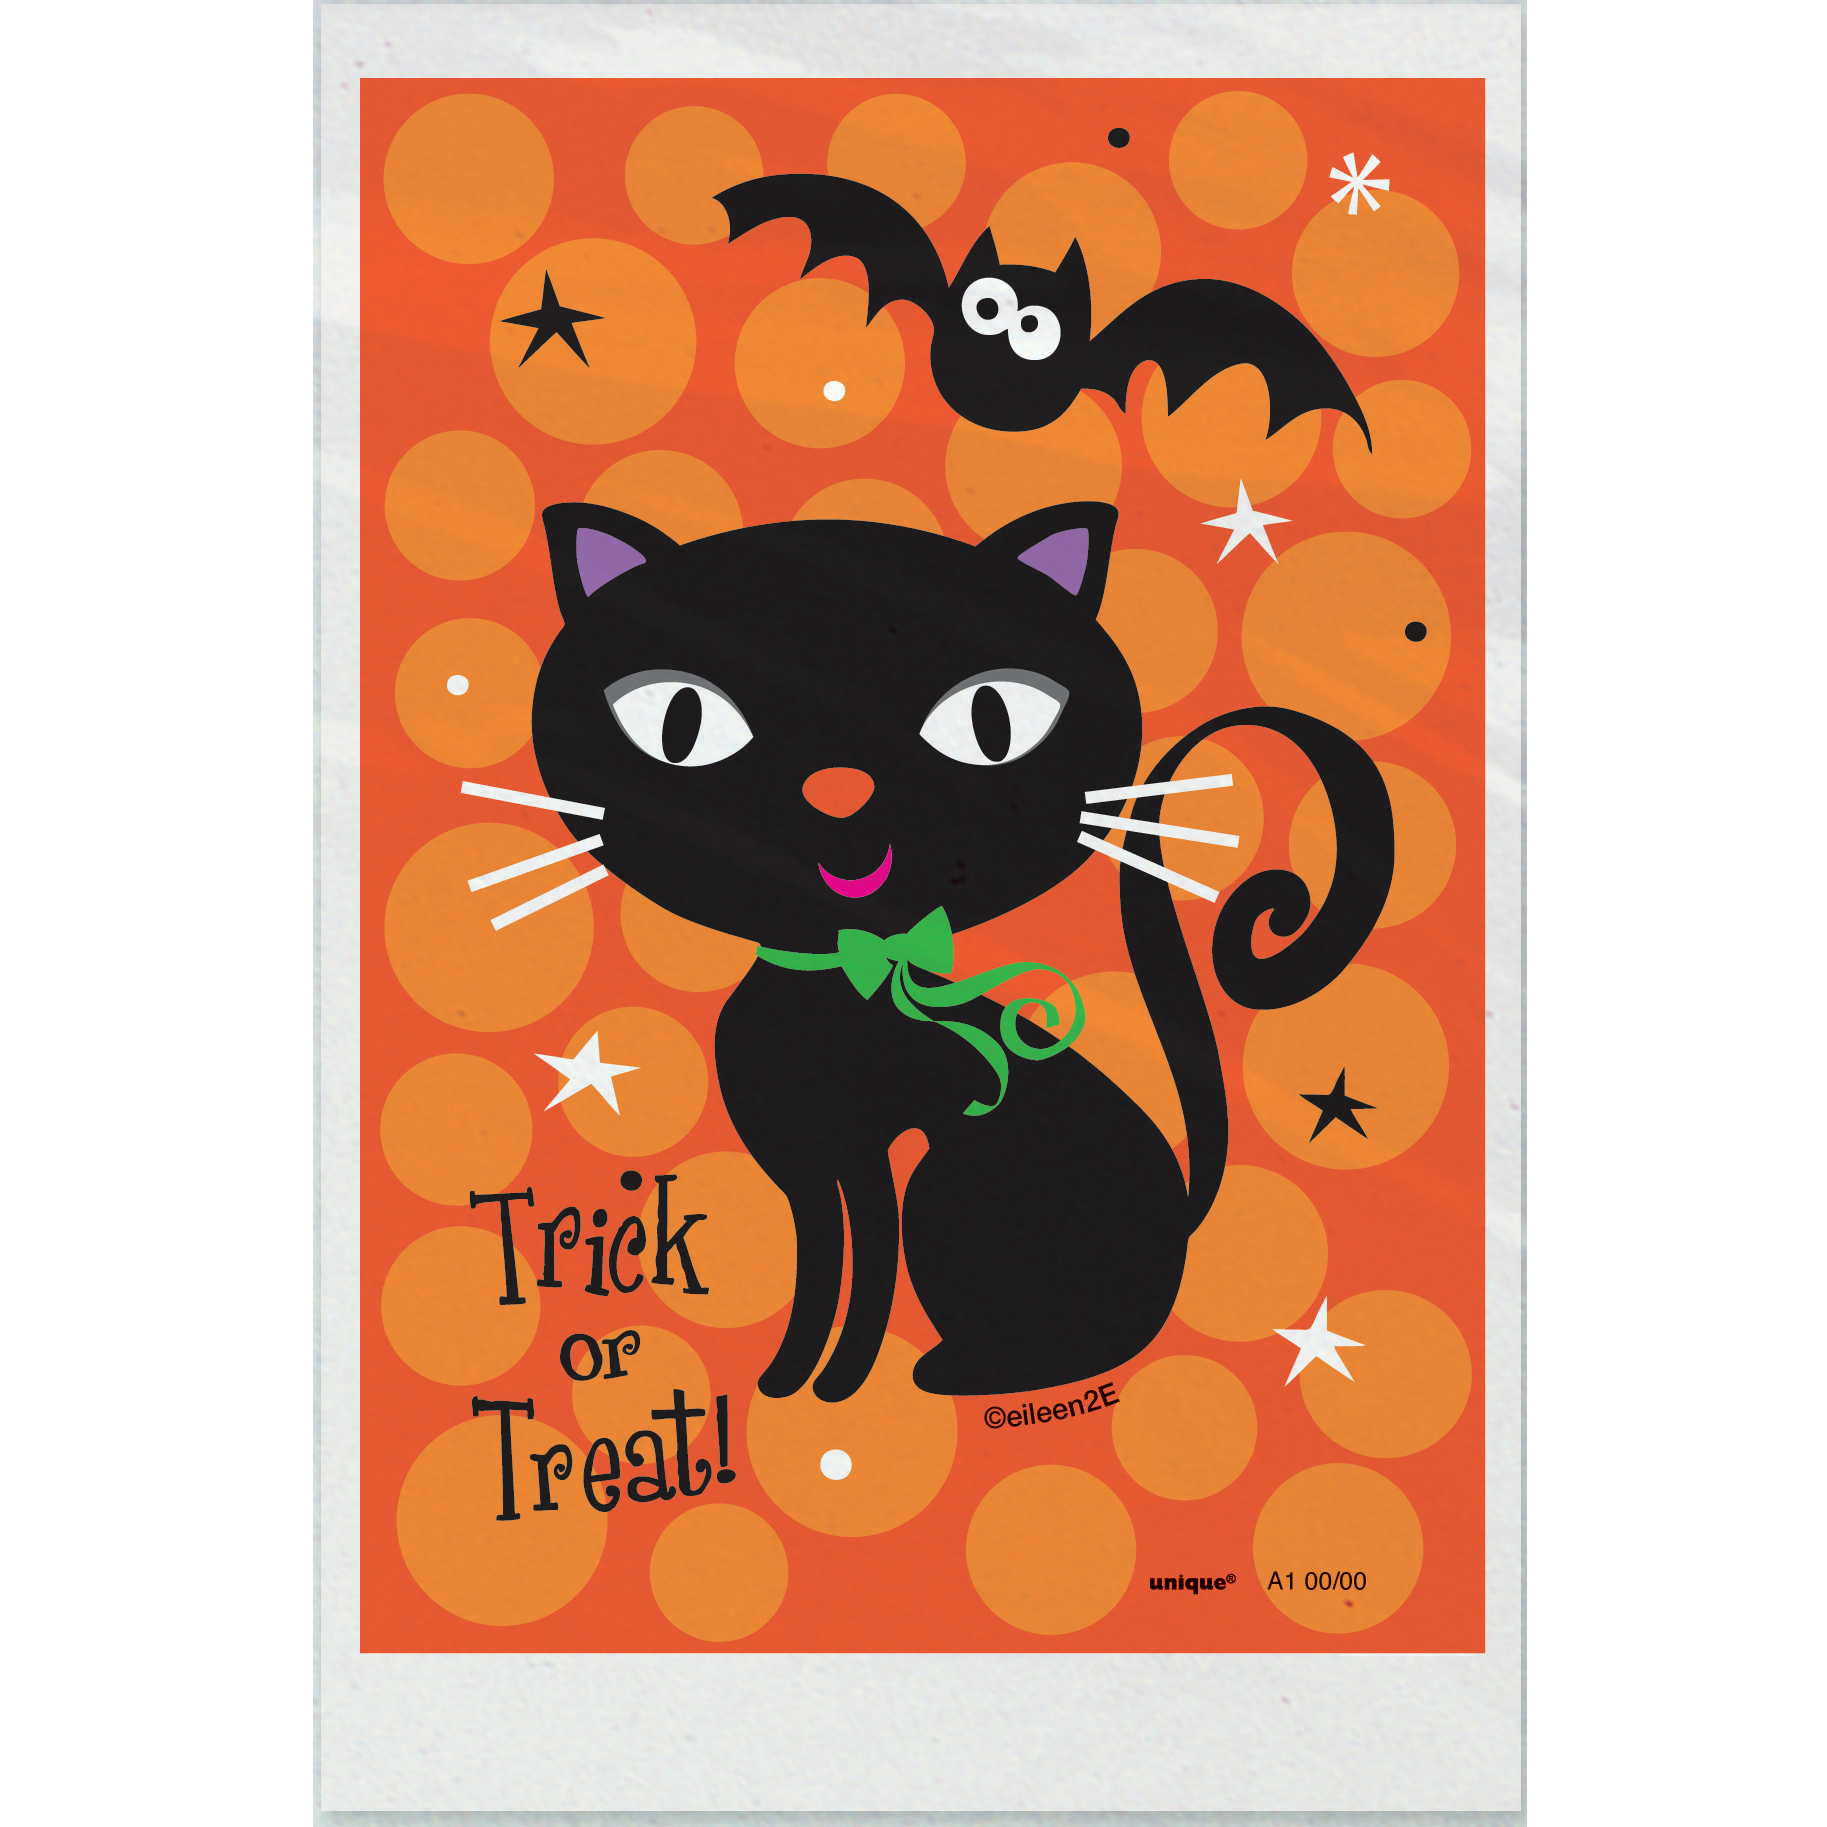 Unique Industries Assorted Colors Halloween Party Bags, 50 Count - image 2 of 2